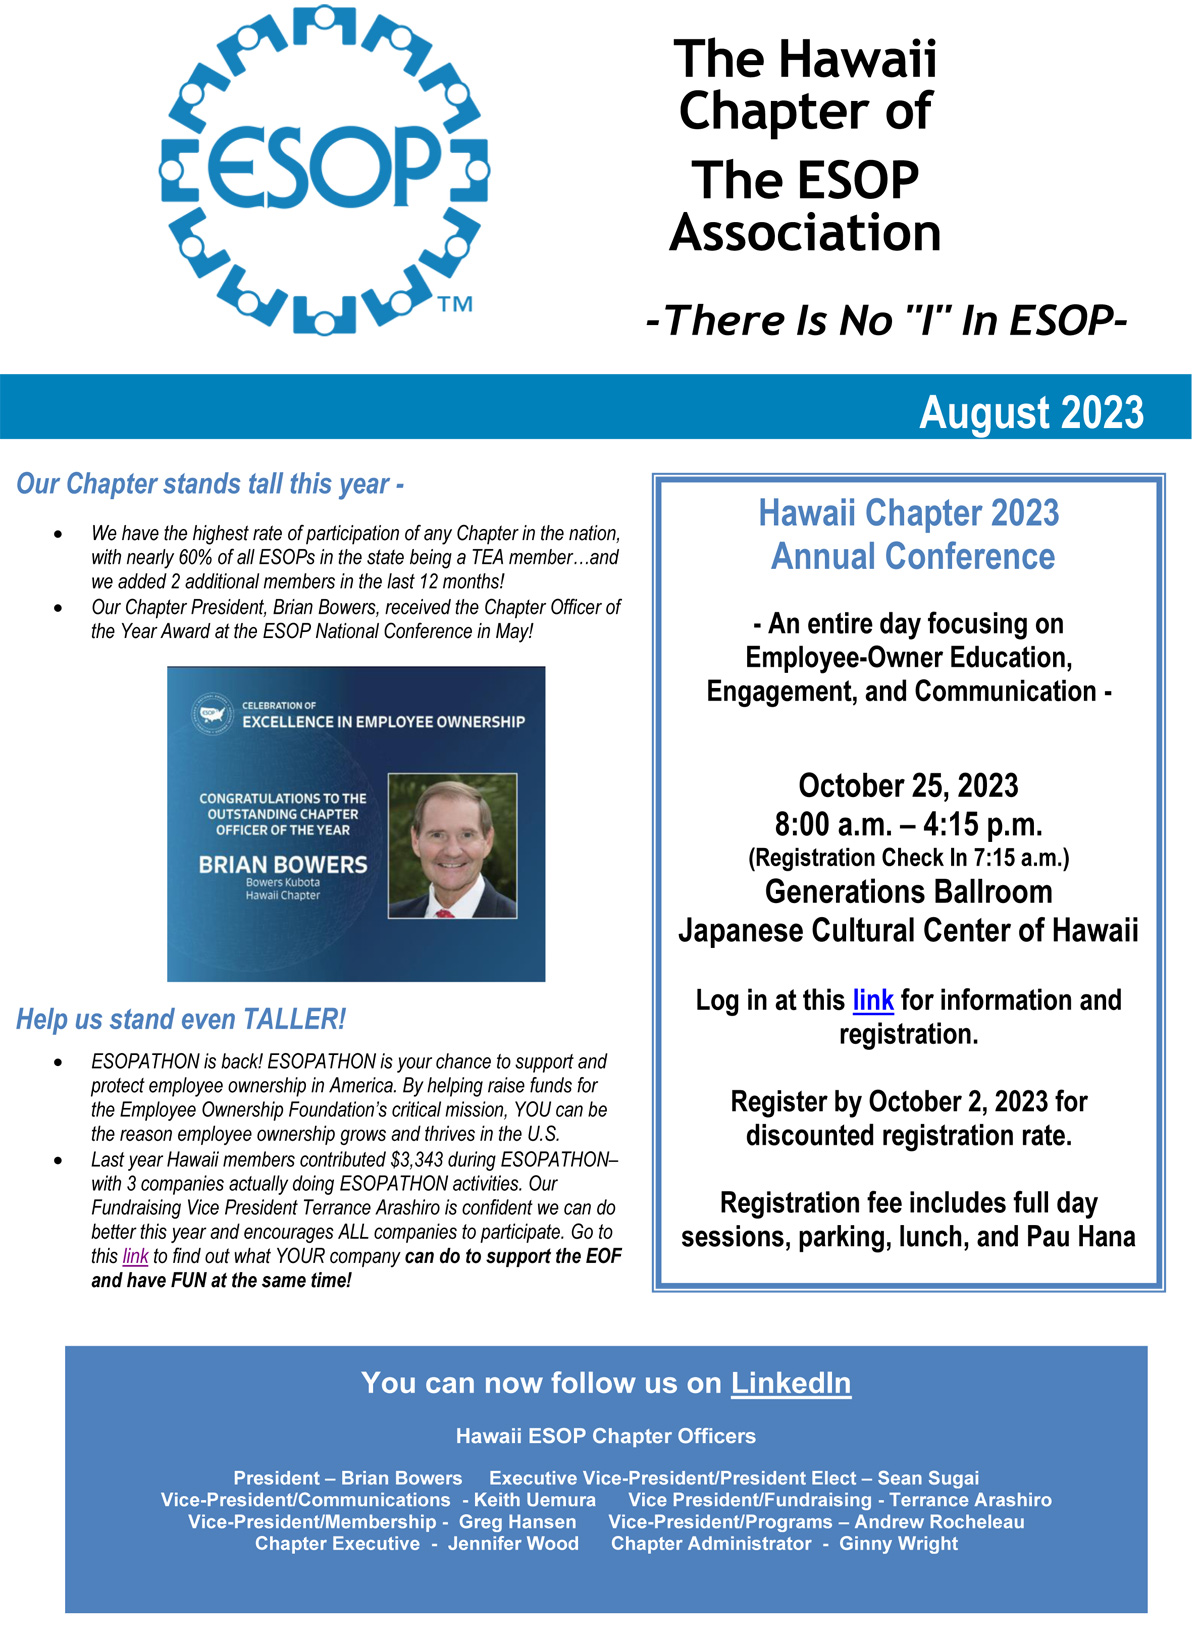 The Hawaii Chapter of The ESOP Association - There is no I in ESOP-